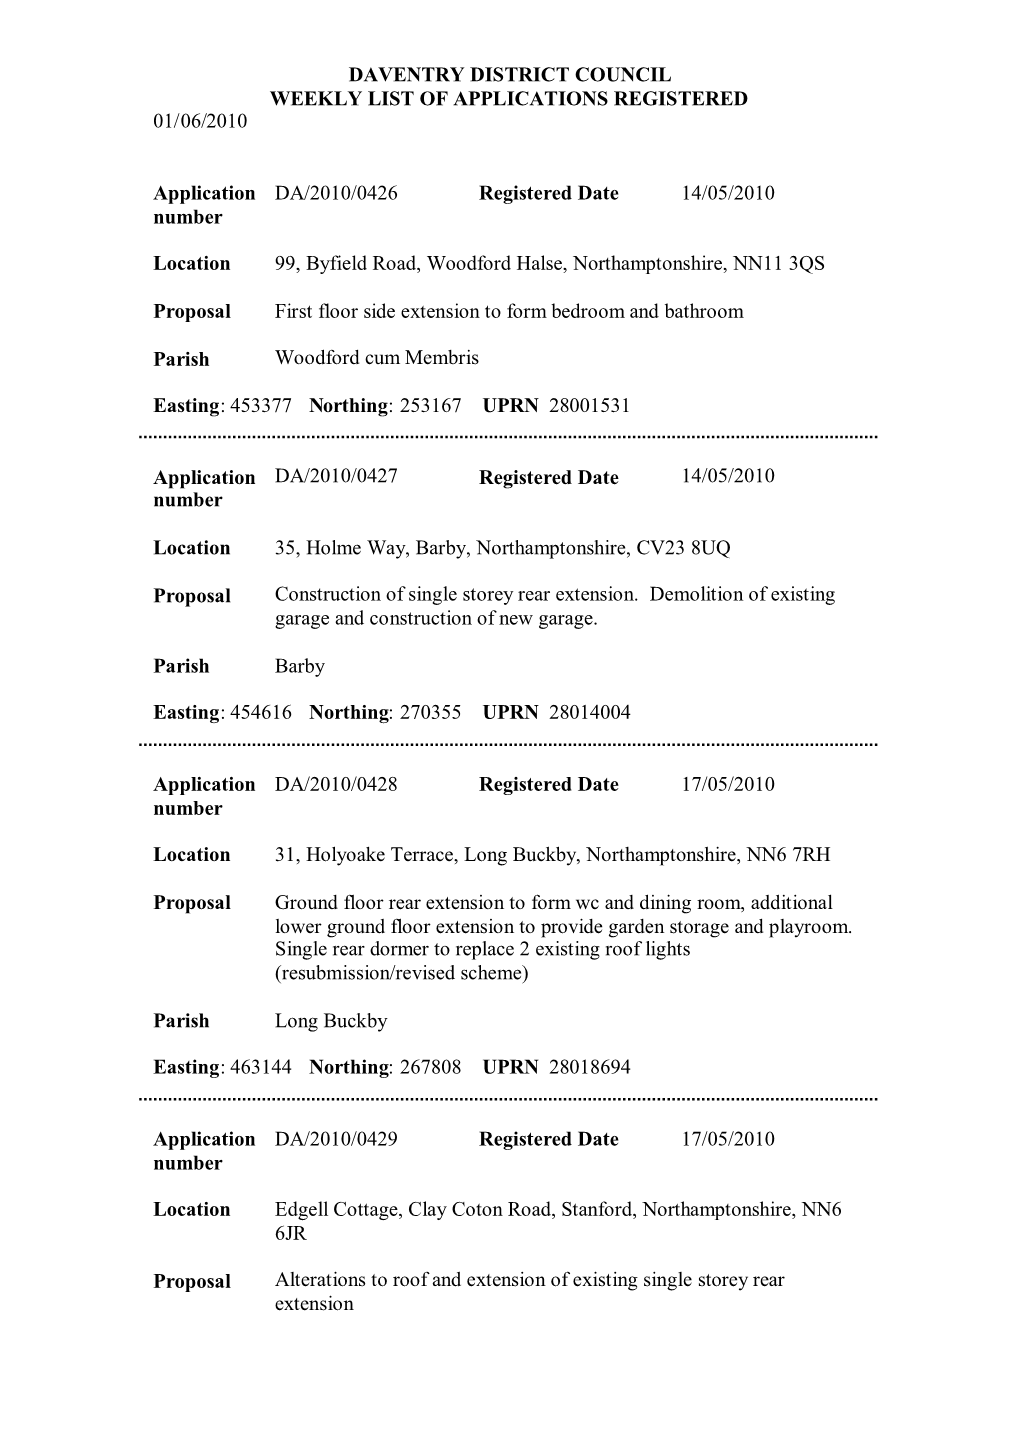 Daventry District Council Weekly List of Applications Registered 01/06/2010